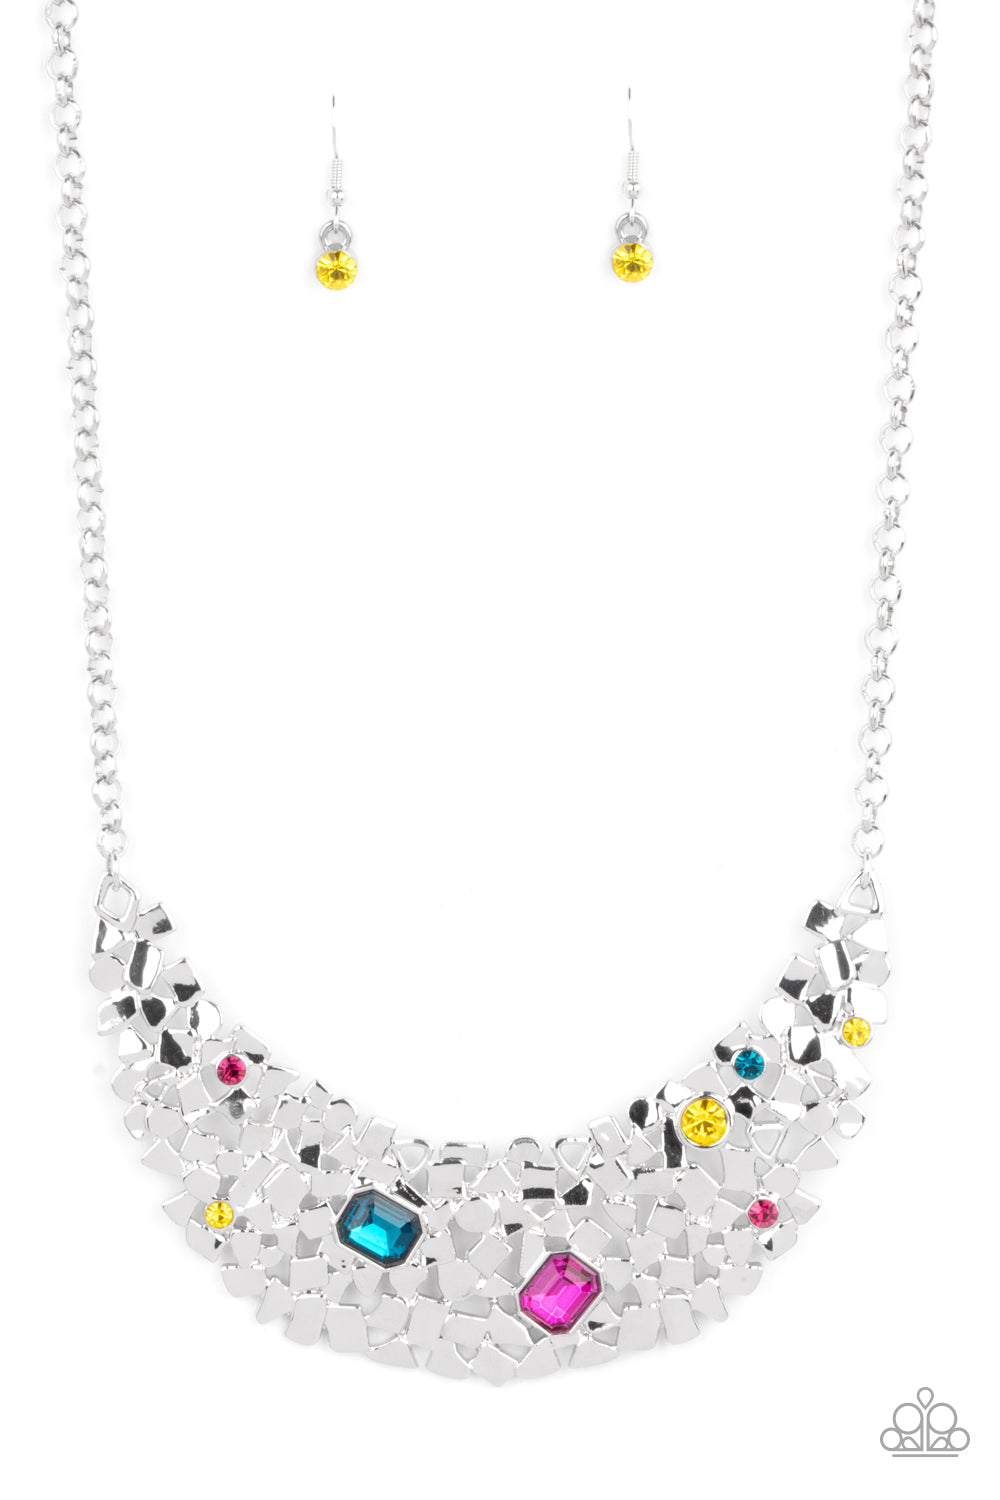 Fabulously Fragmented - Multi - VJ Bedazzled Jewelry